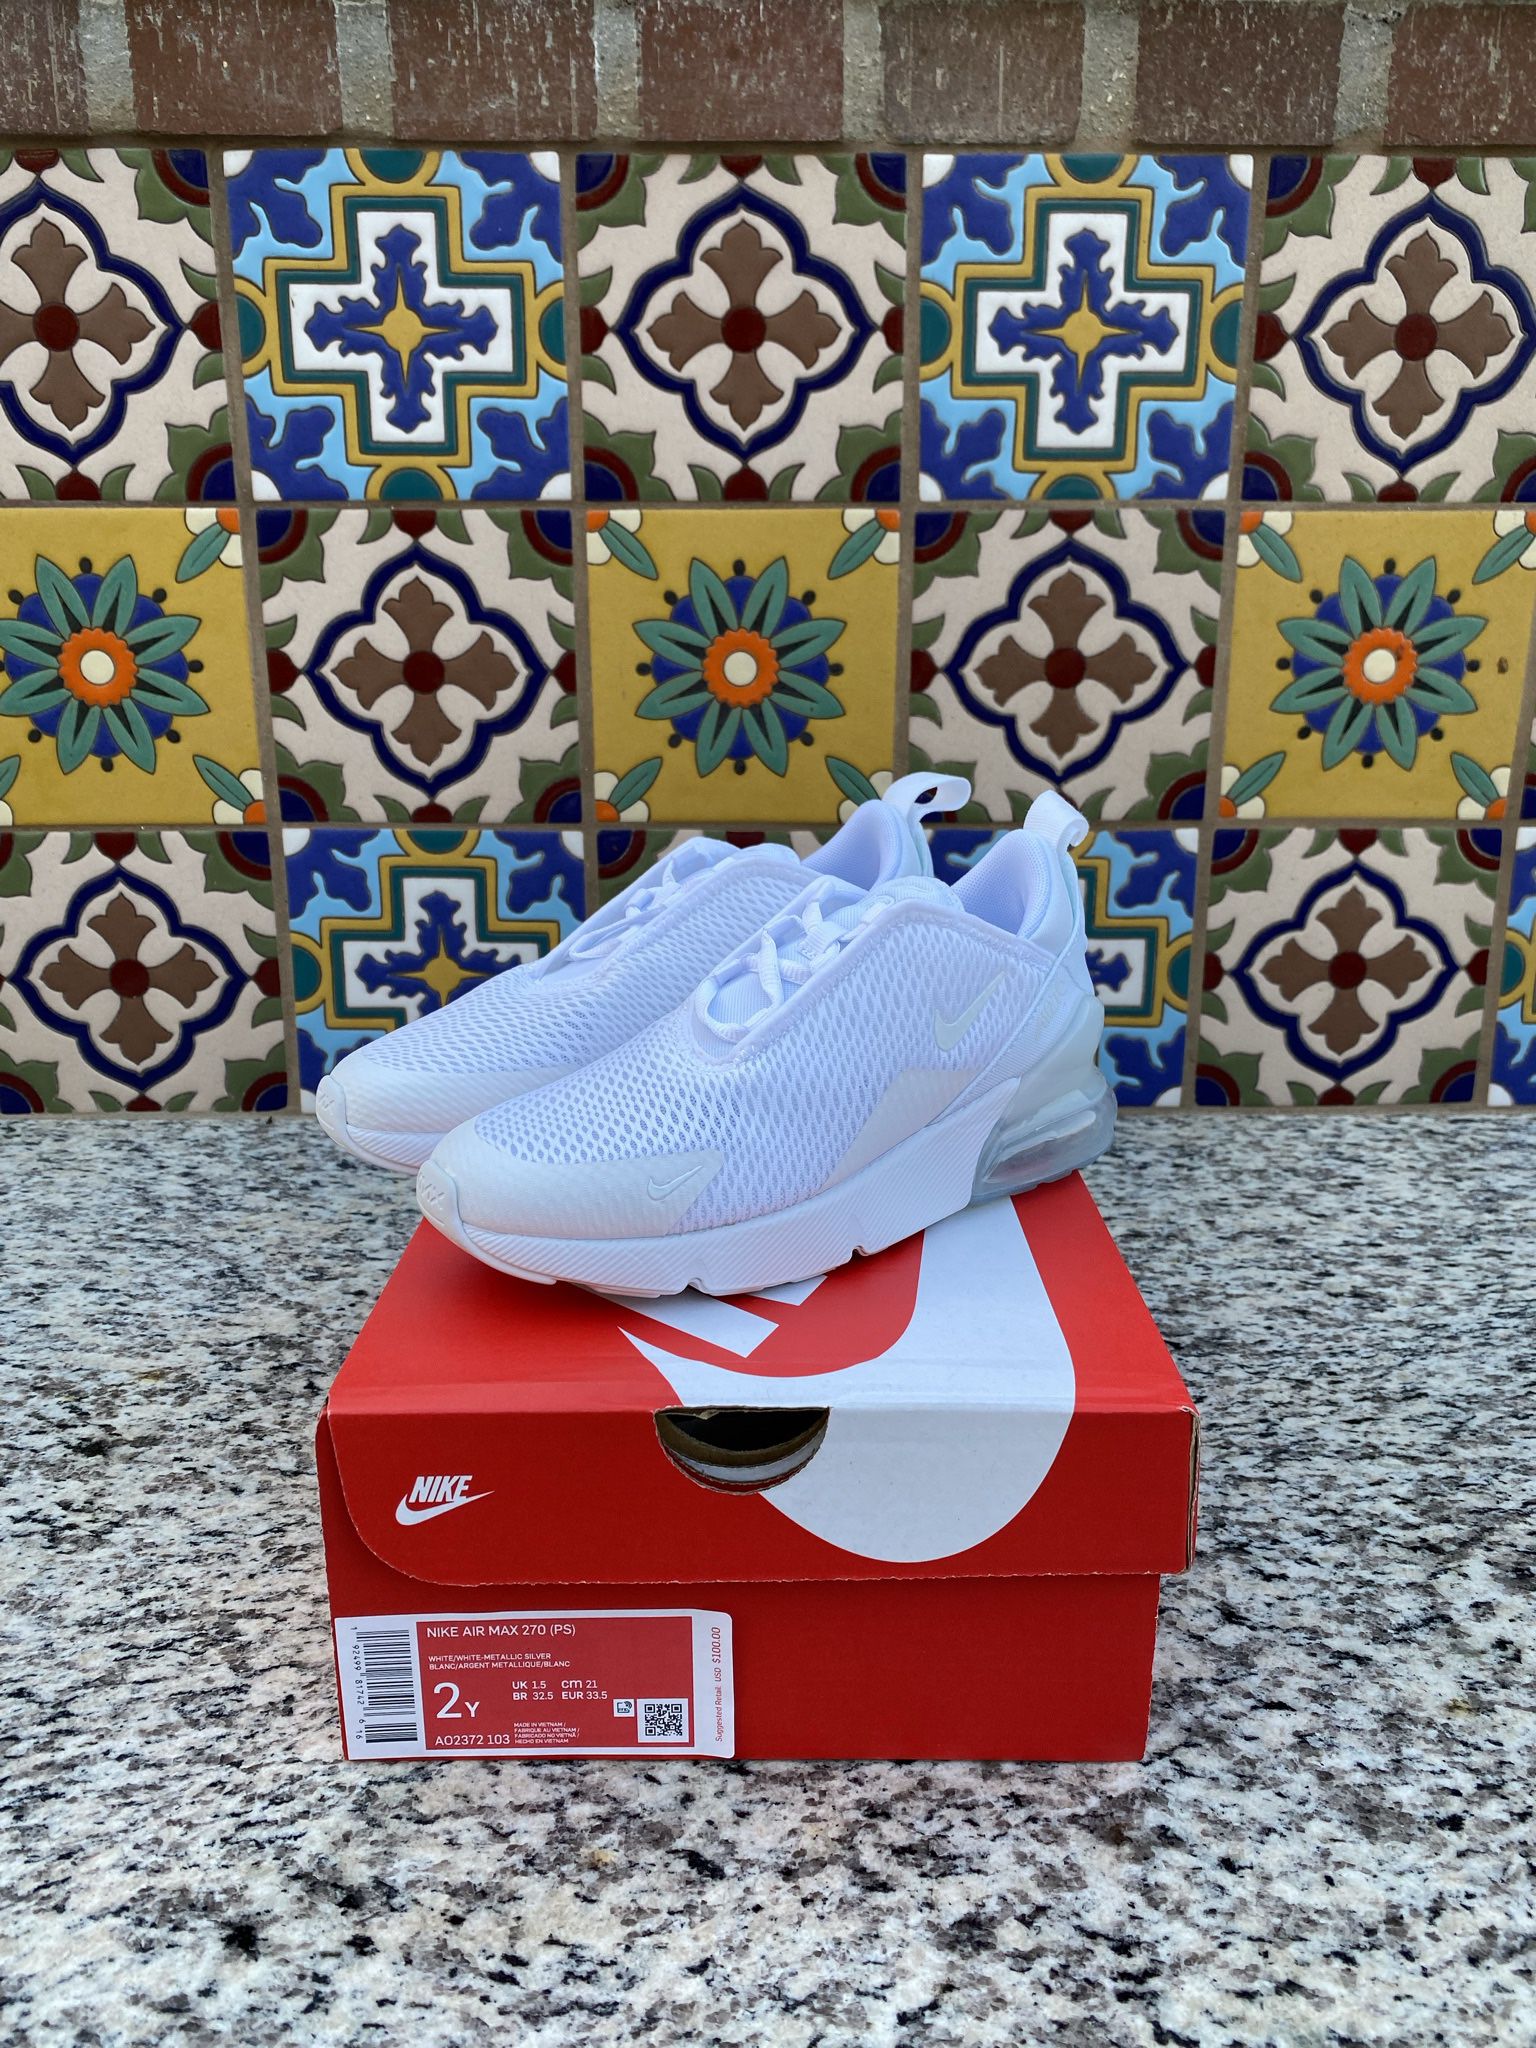 PS Nike Air Max 270 'Triple White' (Size: 2y/3.5w) for Sale West Hollywood, CA - OfferUp